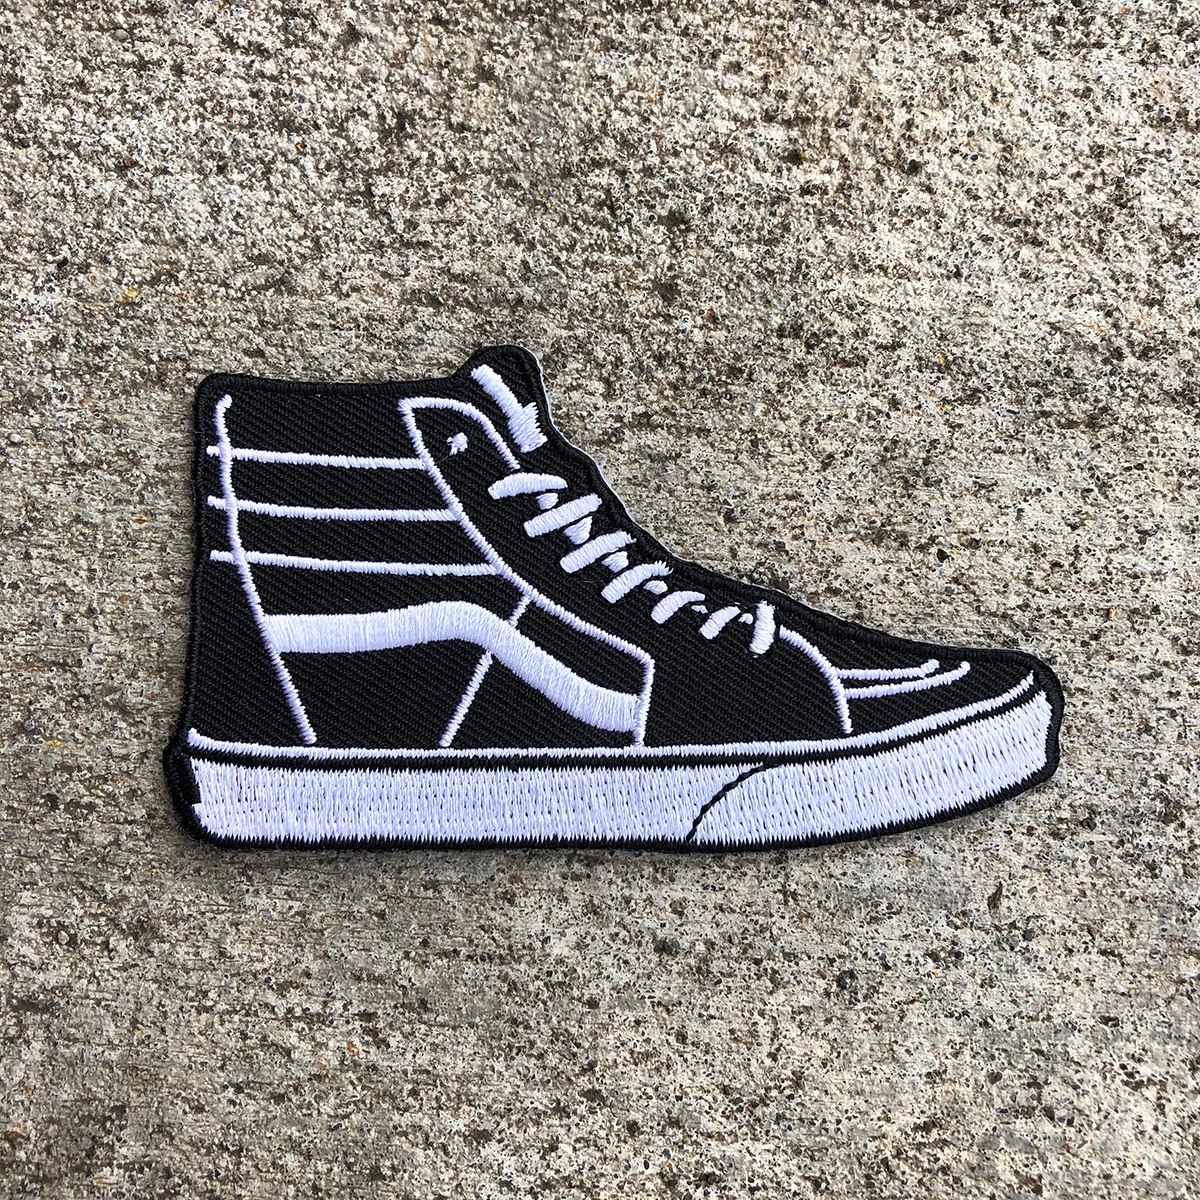 Air Force 1 Patch for shoes Nike patch Nike swoosh bandana af1 custom air  forces | eBay